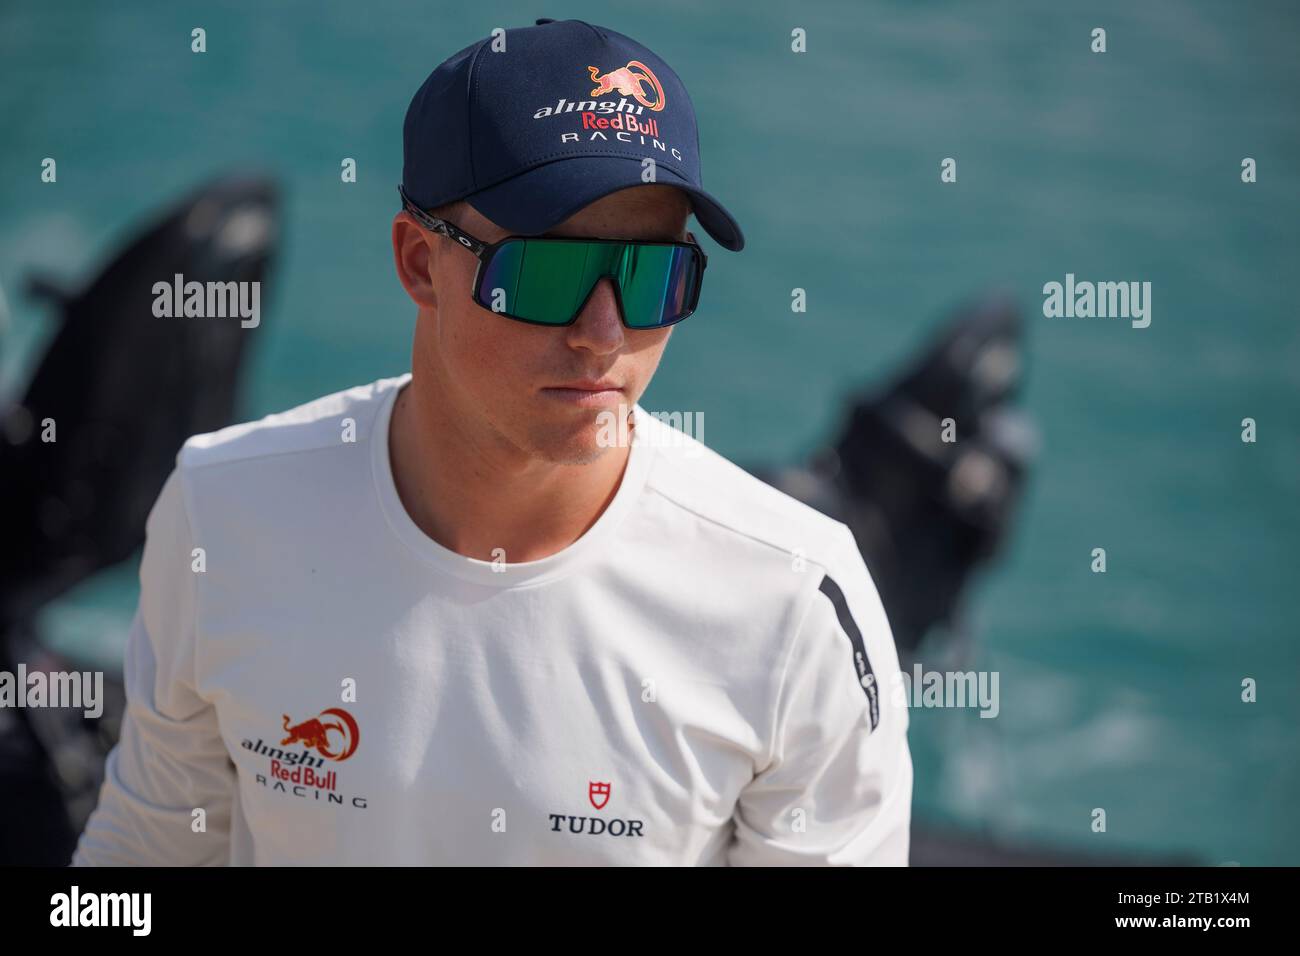 Alinghi Red Bull Racing finished third in the overall standings on December  2 in the second America's Cup preliminary regatta in Jeddah, Saudi Arabia.  It marked the final day of racing for